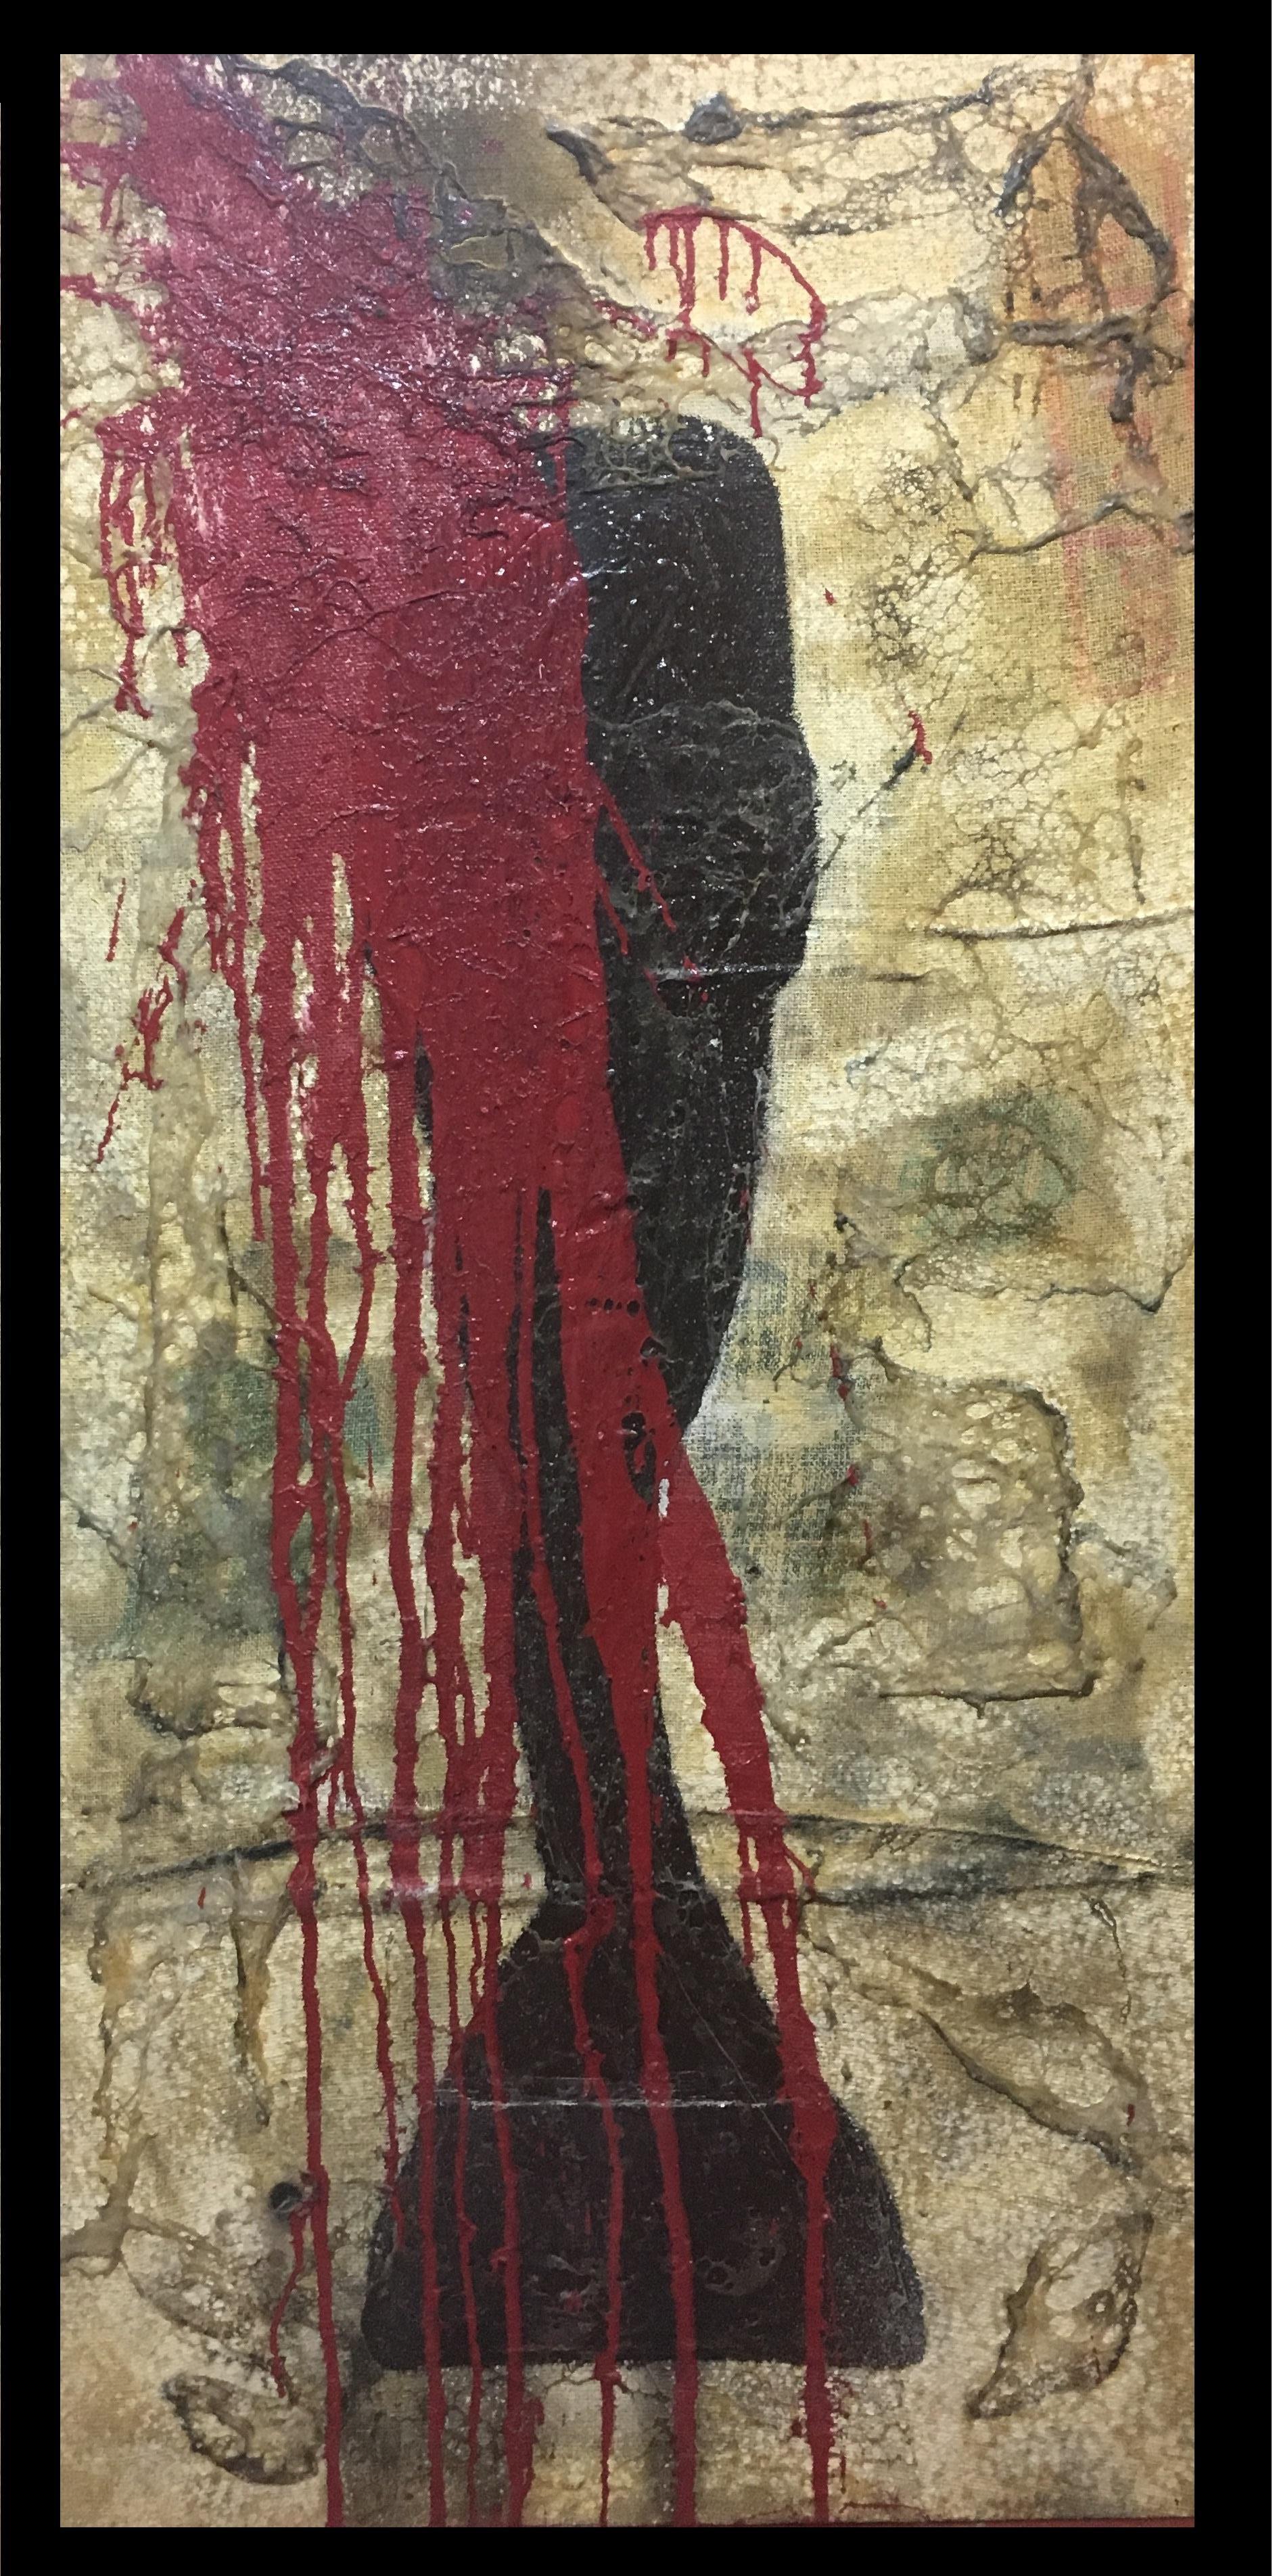  Bultrini 8 Red and Black  Golden   abstract mixed media acrylic. Vertical - Painting by MATTEO BULTRINI